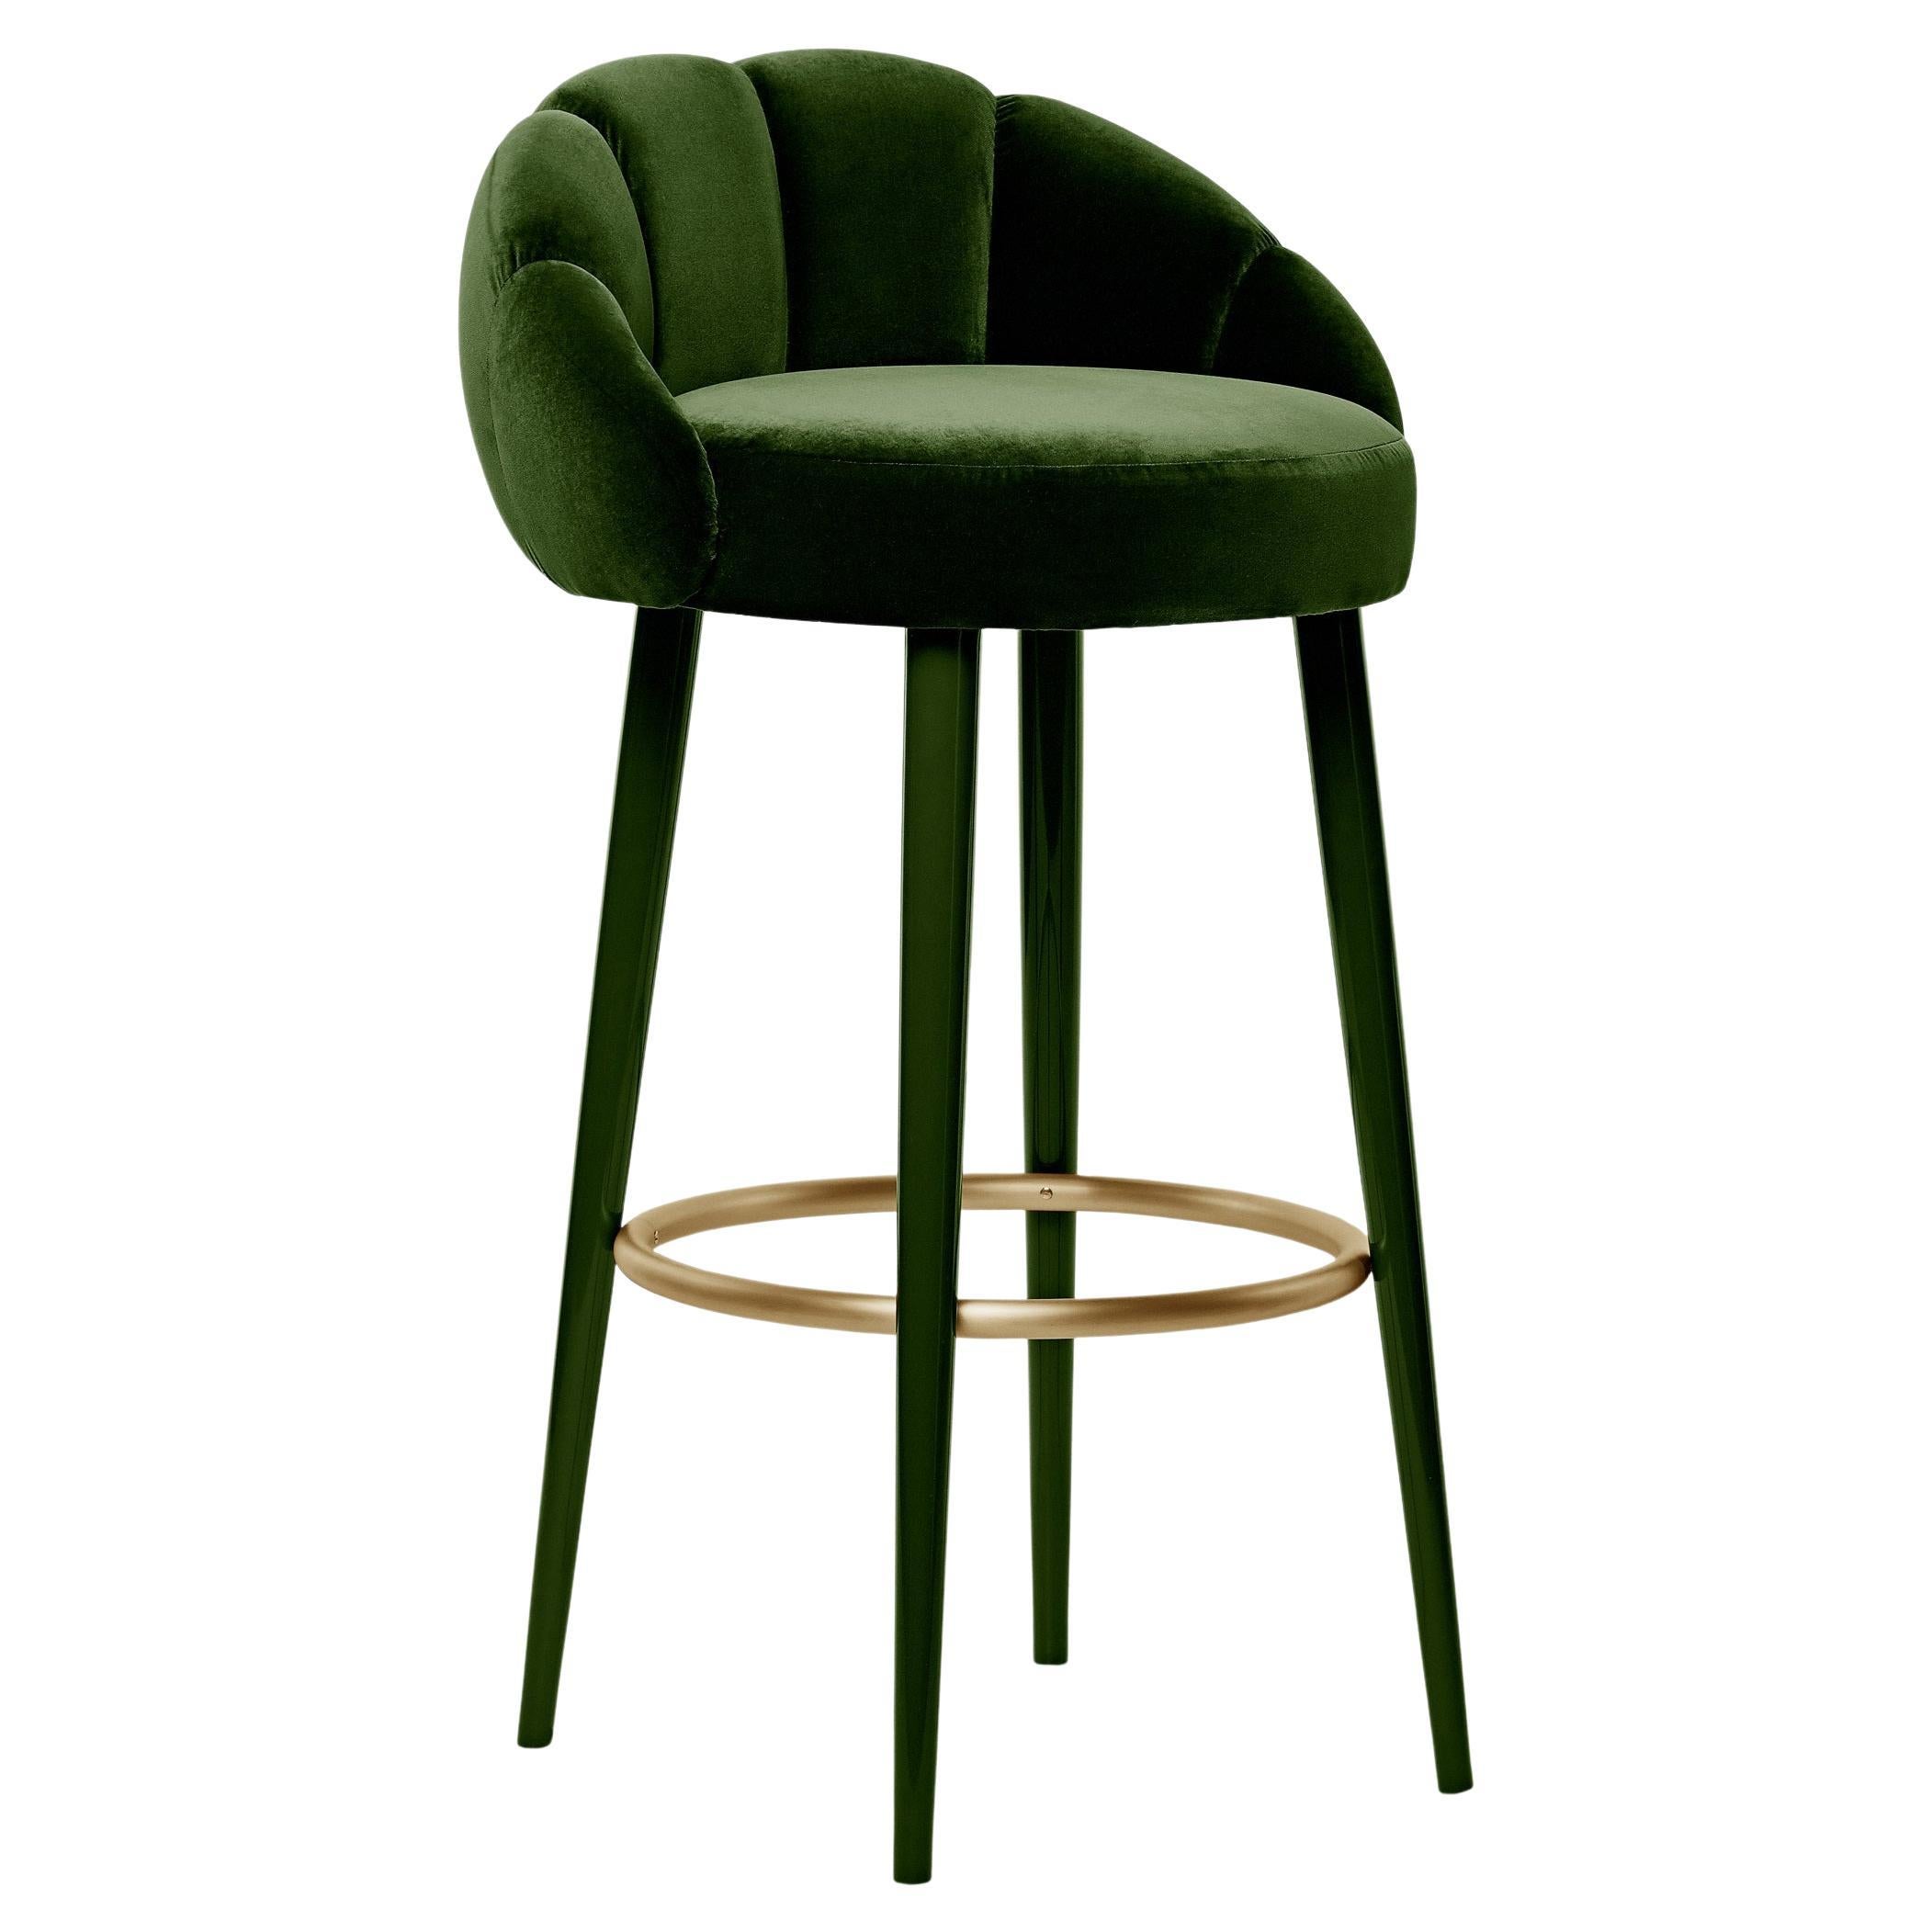 Contemporary Barstool with Seaming Details on the Front & Back For Sale